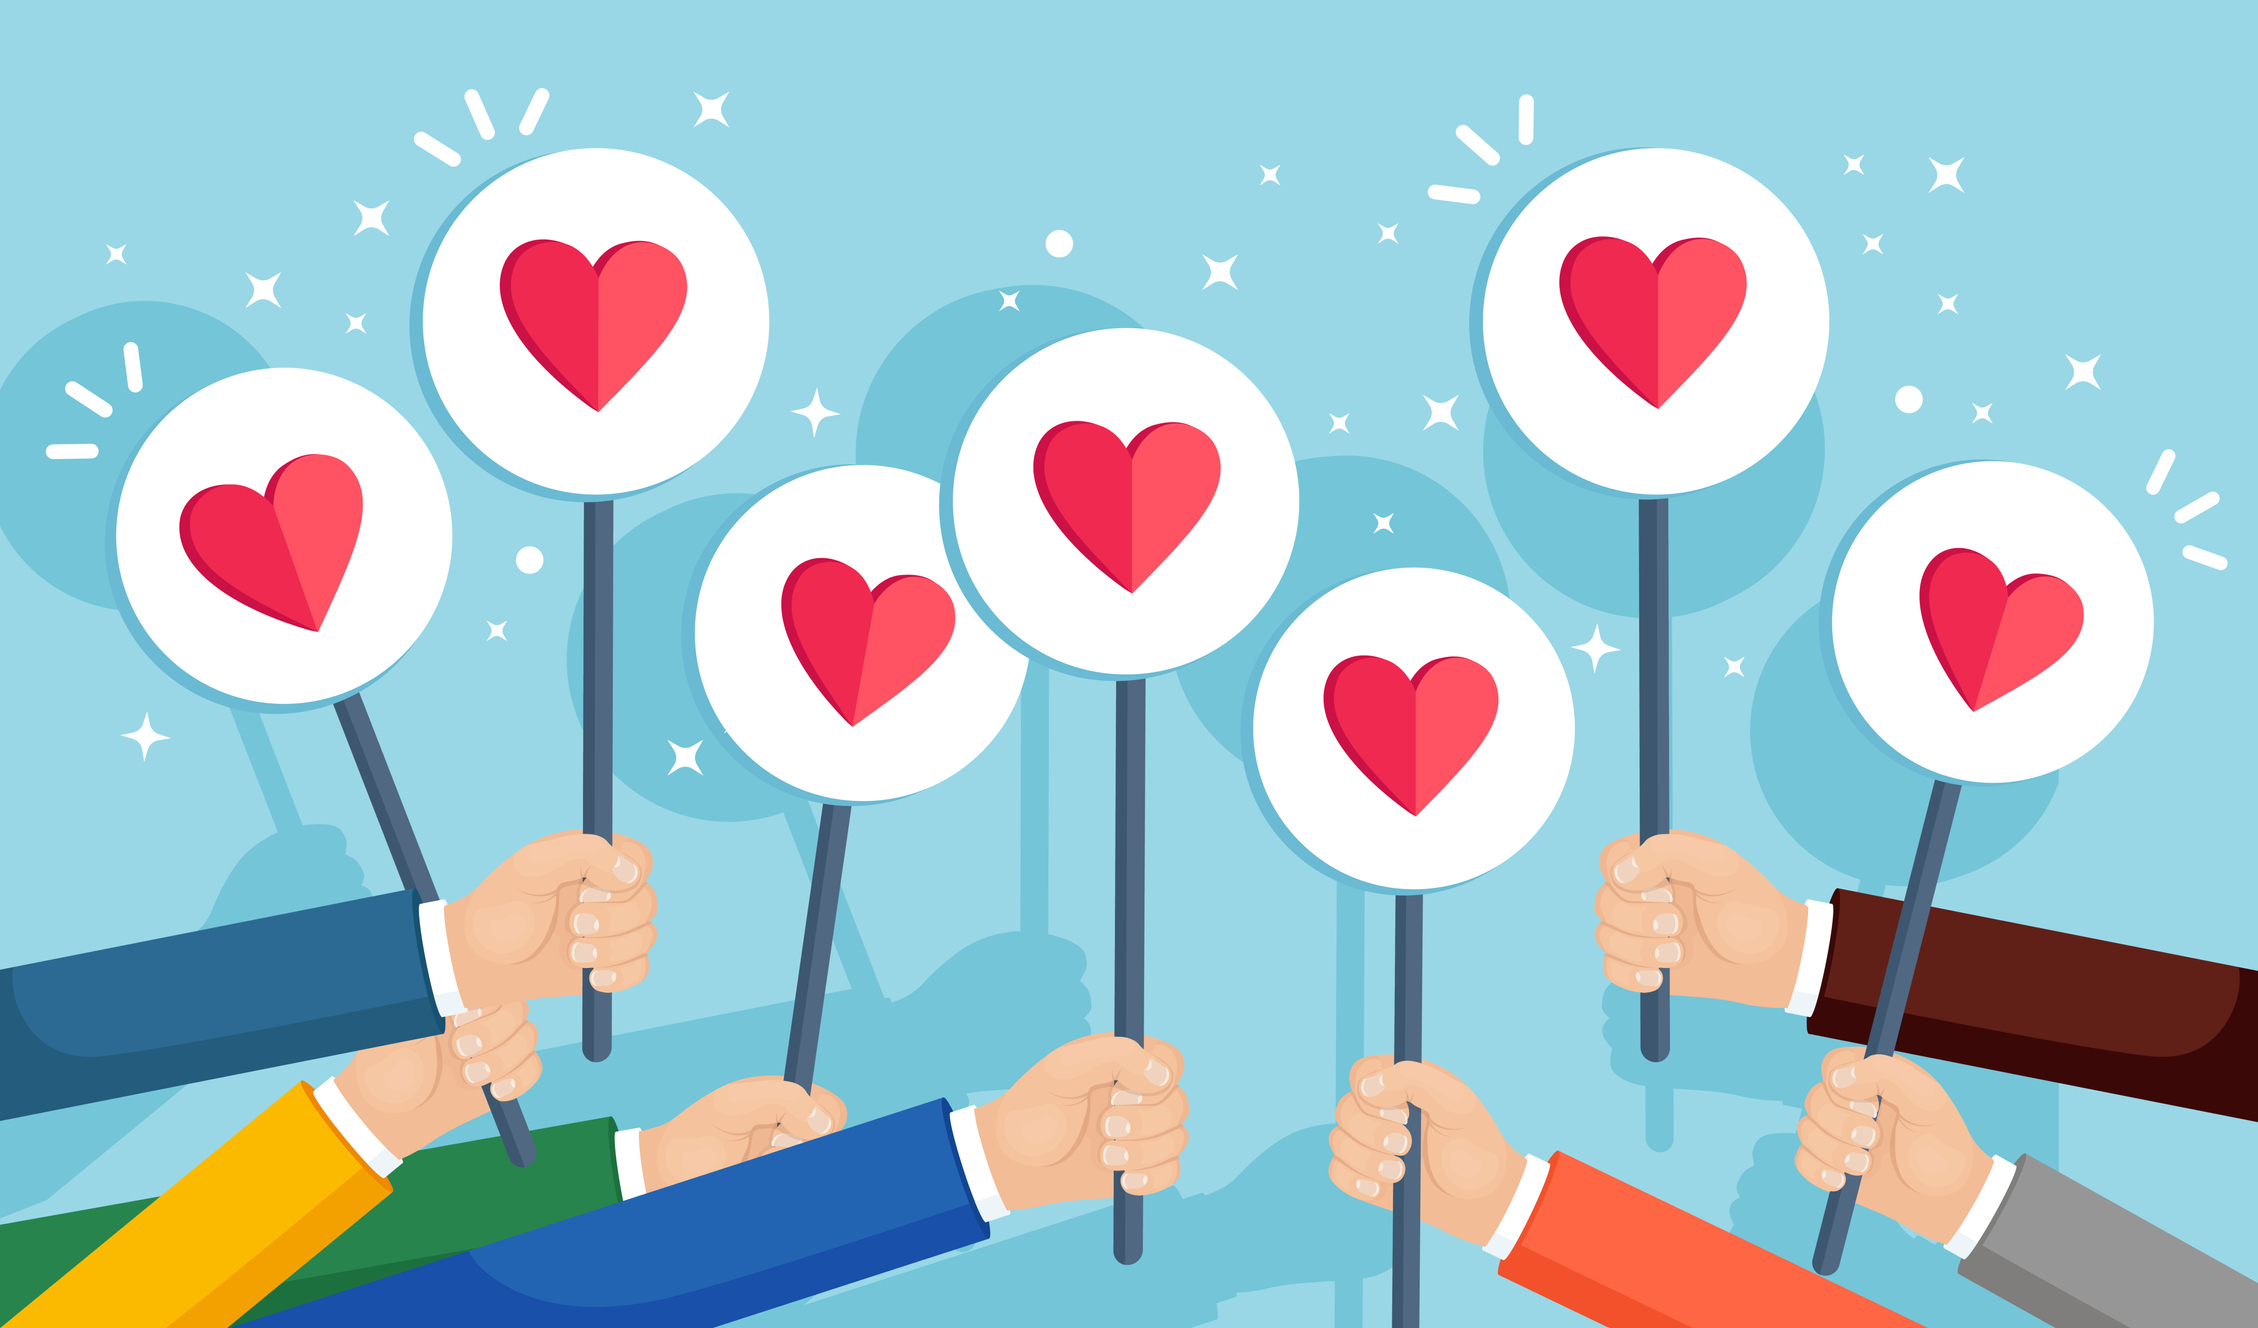 Why customers should love your brand